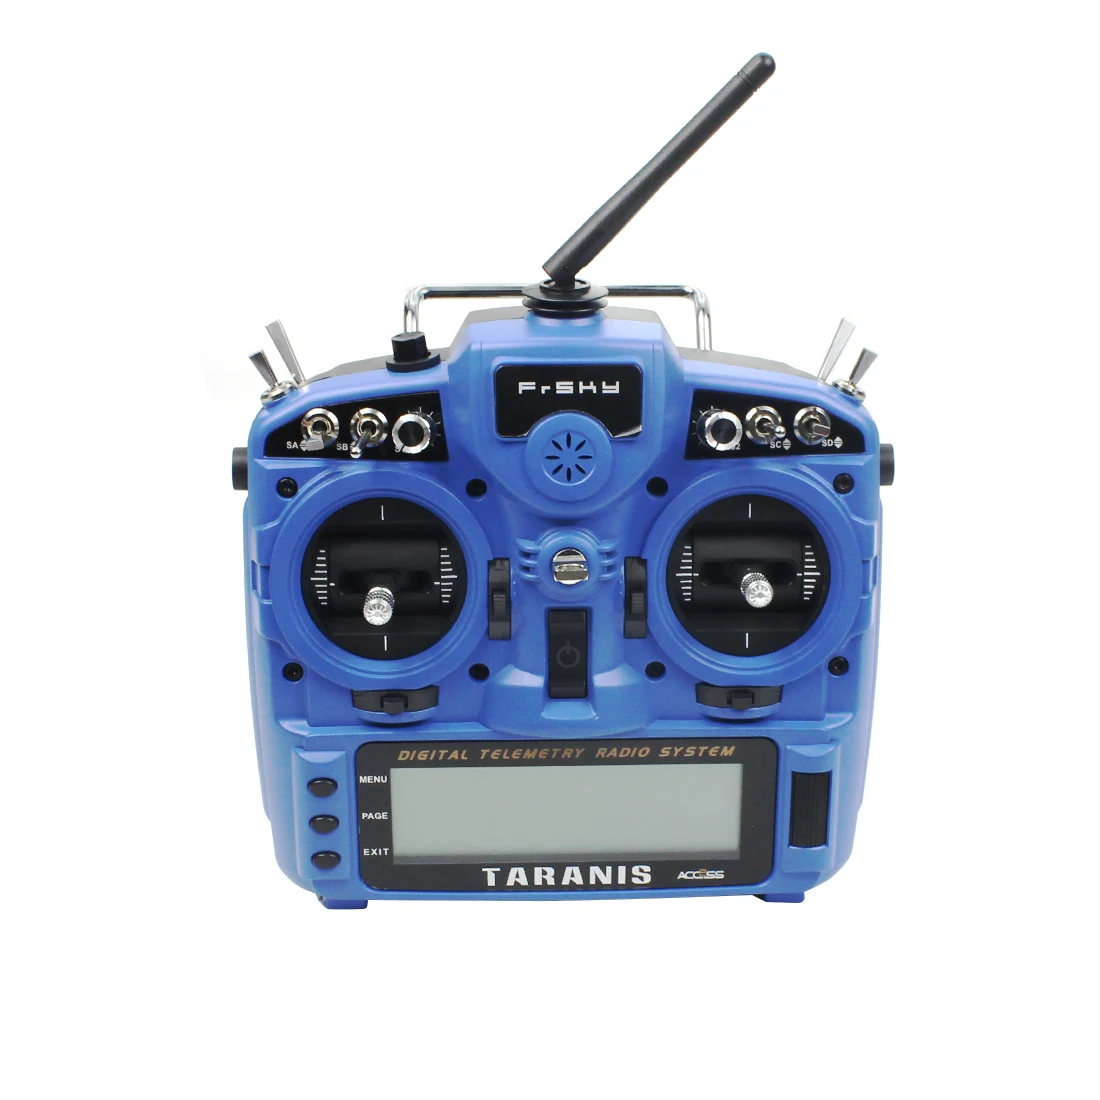 FrSky Taranis X9D Plus 2.4G 24CH ACCST D16 ACCESS Transmitter with l9r Receiver Supports Spectrum Analyzer for RC Drone